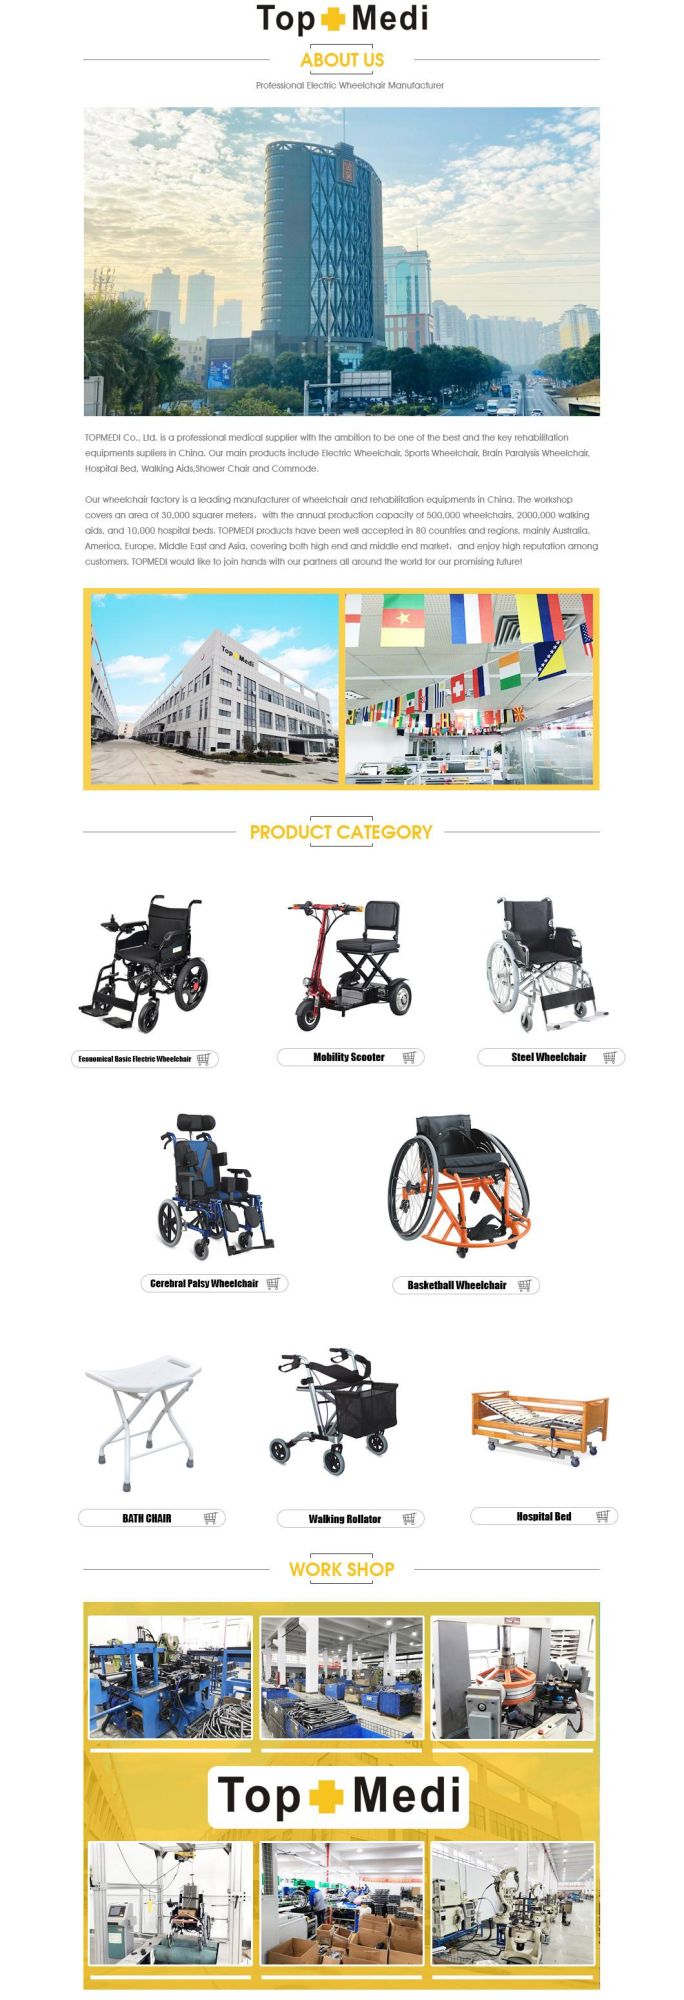 Aluminum Portable Lightweight Foldable Wheelchair for Disabled Elderly People